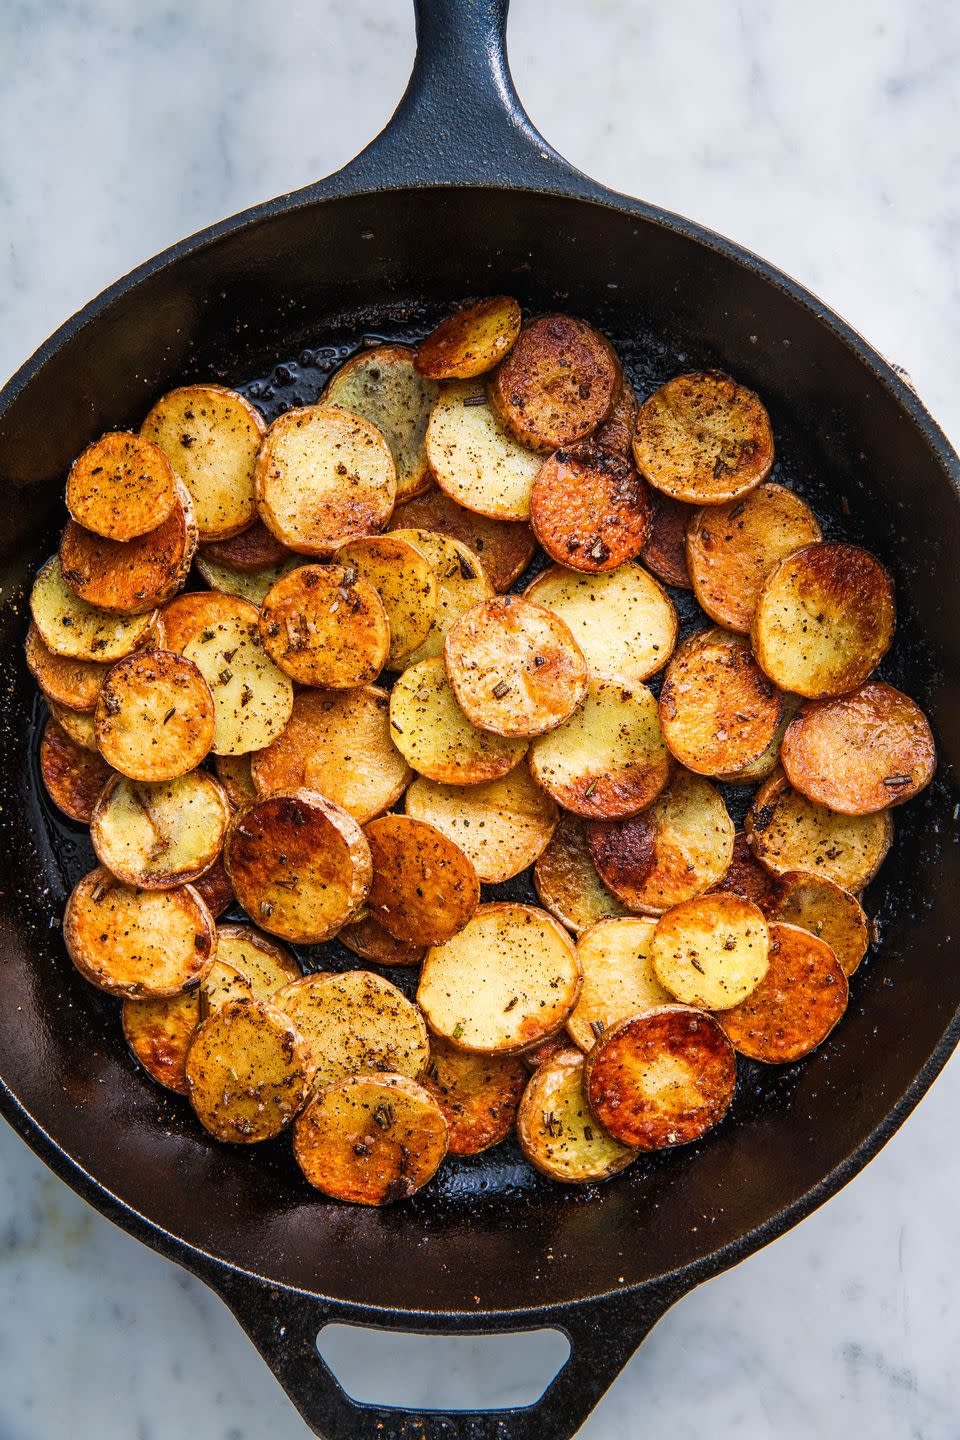 <p>The best part about these pan-fried potatoes (and potatoes in general) is that they can be used as the perfect sidekick for any meal. They'd be a delicious breakfast with <a href="https://www.delish.com/cooking/a27086390/creamy-scrambled-eggs-recipe/" rel="nofollow noopener" target="_blank" data-ylk="slk:creamy scrambled eggs" class="link ">creamy scrambled eggs</a> or stuffed in this <a href="https://www.delish.com/cooking/recipe-ideas/a24569400/breakfast-burrito-recipe/" rel="nofollow noopener" target="_blank" data-ylk="slk:bacon breakfast burrito" class="link ">bacon breakfast burrito</a>. Use these to add a little drama to a classic <a href="https://www.delish.com/cooking/recipe-ideas/a39564289/classic-nicoise-salad-recipe/" rel="nofollow noopener" target="_blank" data-ylk="slk:niçoise salad" class="link ">niçoise salad</a> or as an unexpected base for <a href="https://www.delish.com/cooking/recipe-ideas/a22595612/best-totchos-recipe/" rel="nofollow noopener" target="_blank" data-ylk="slk:beef totchos" class="link ">beef totchos</a>. </p><p>Get the <strong><a href="https://www.delish.com/cooking/a23463225/pan-fried-potatoes/" rel="nofollow noopener" target="_blank" data-ylk="slk:Perfect Pan Fried Potatoes recipe" class="link ">Perfect Pan Fried Potatoes recipe</a>. </strong></p>